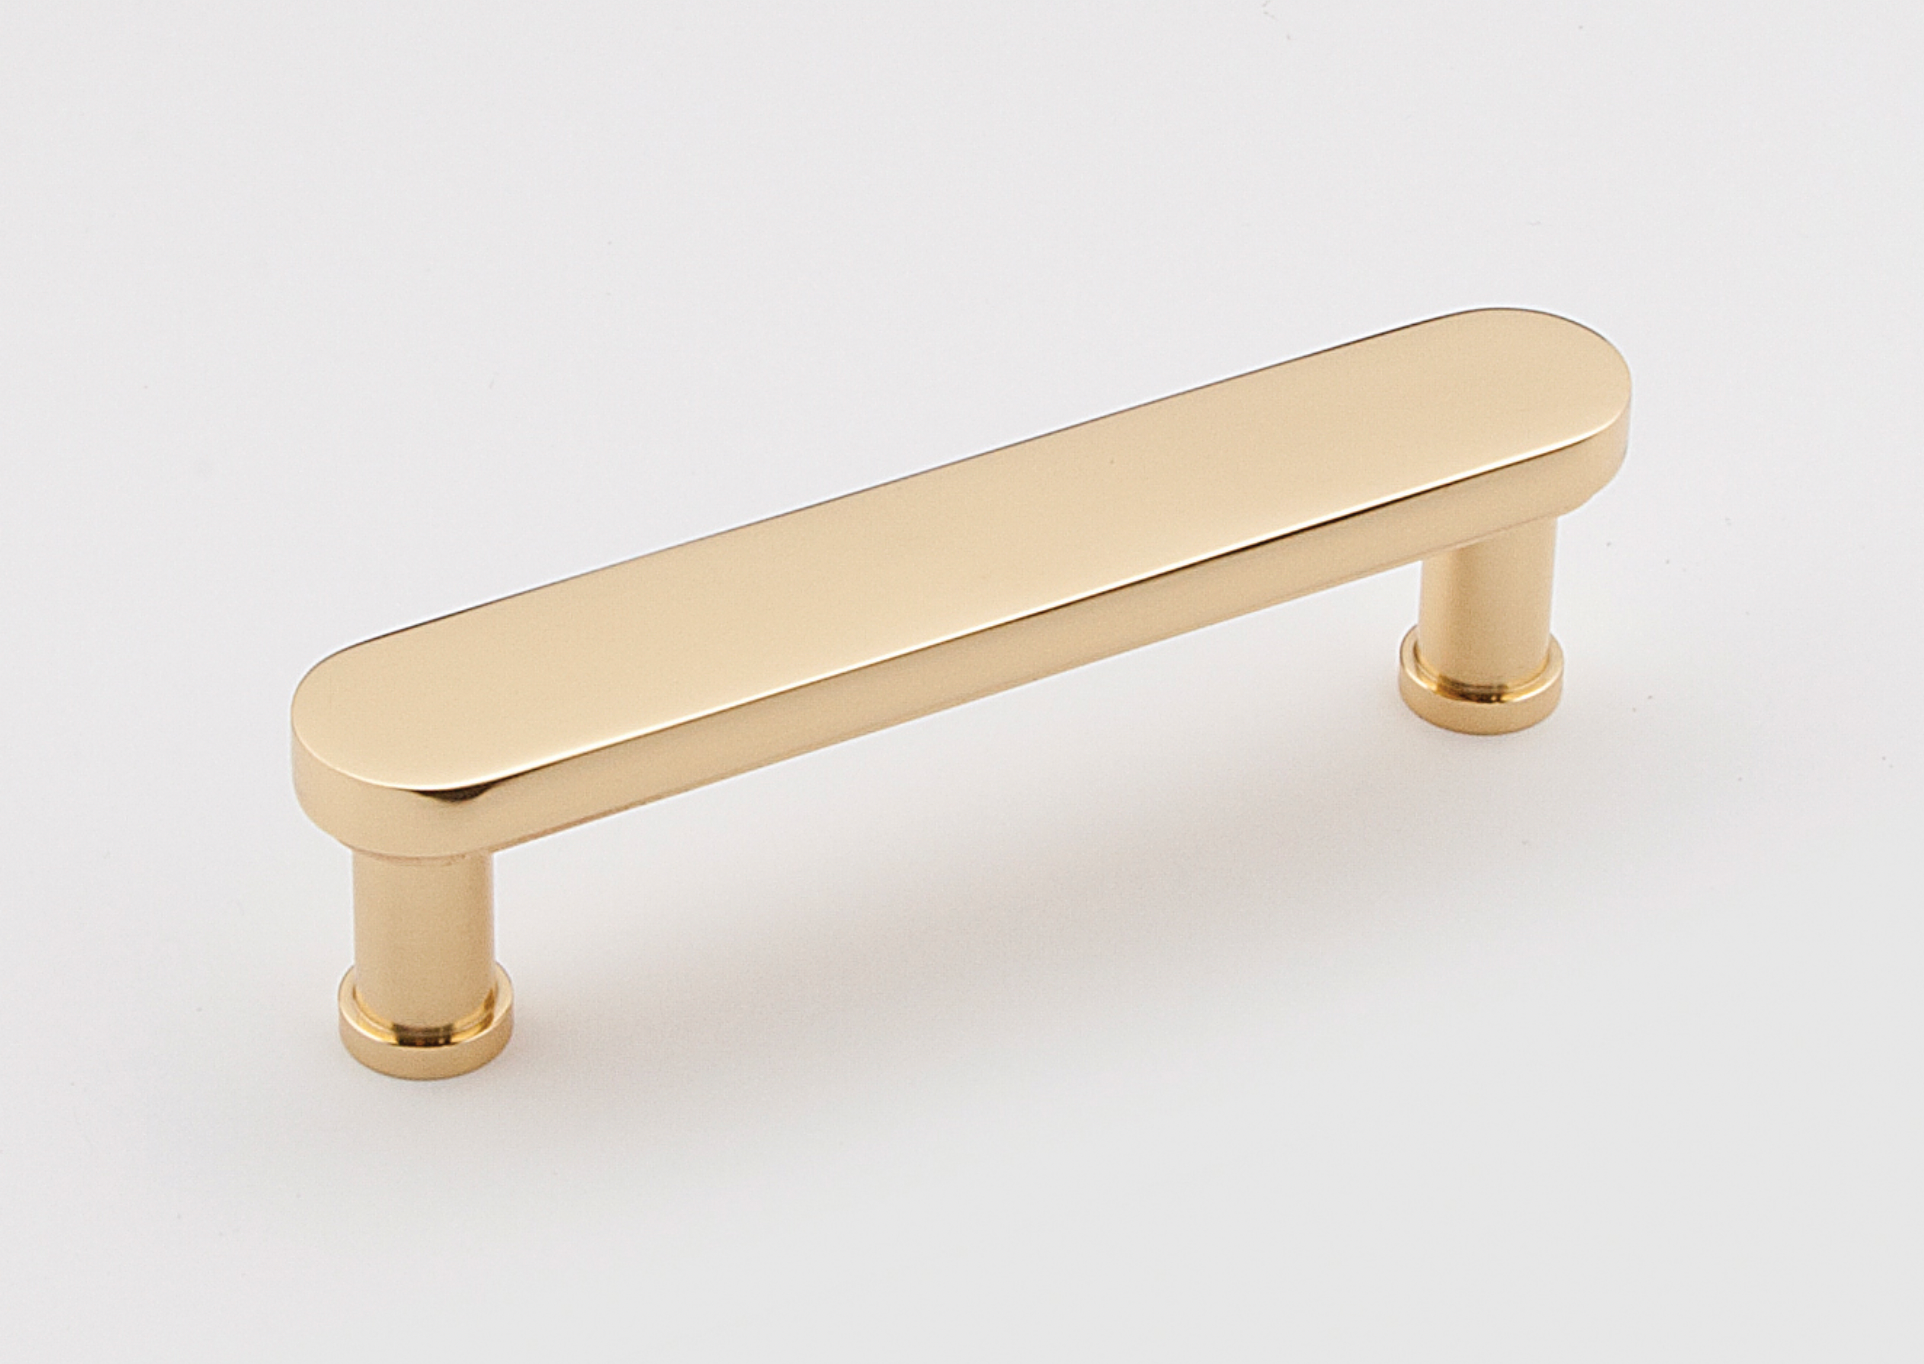 Unlacquered Brass Modern Cabinet Knob and Drawer Pulls - Industry Hardware